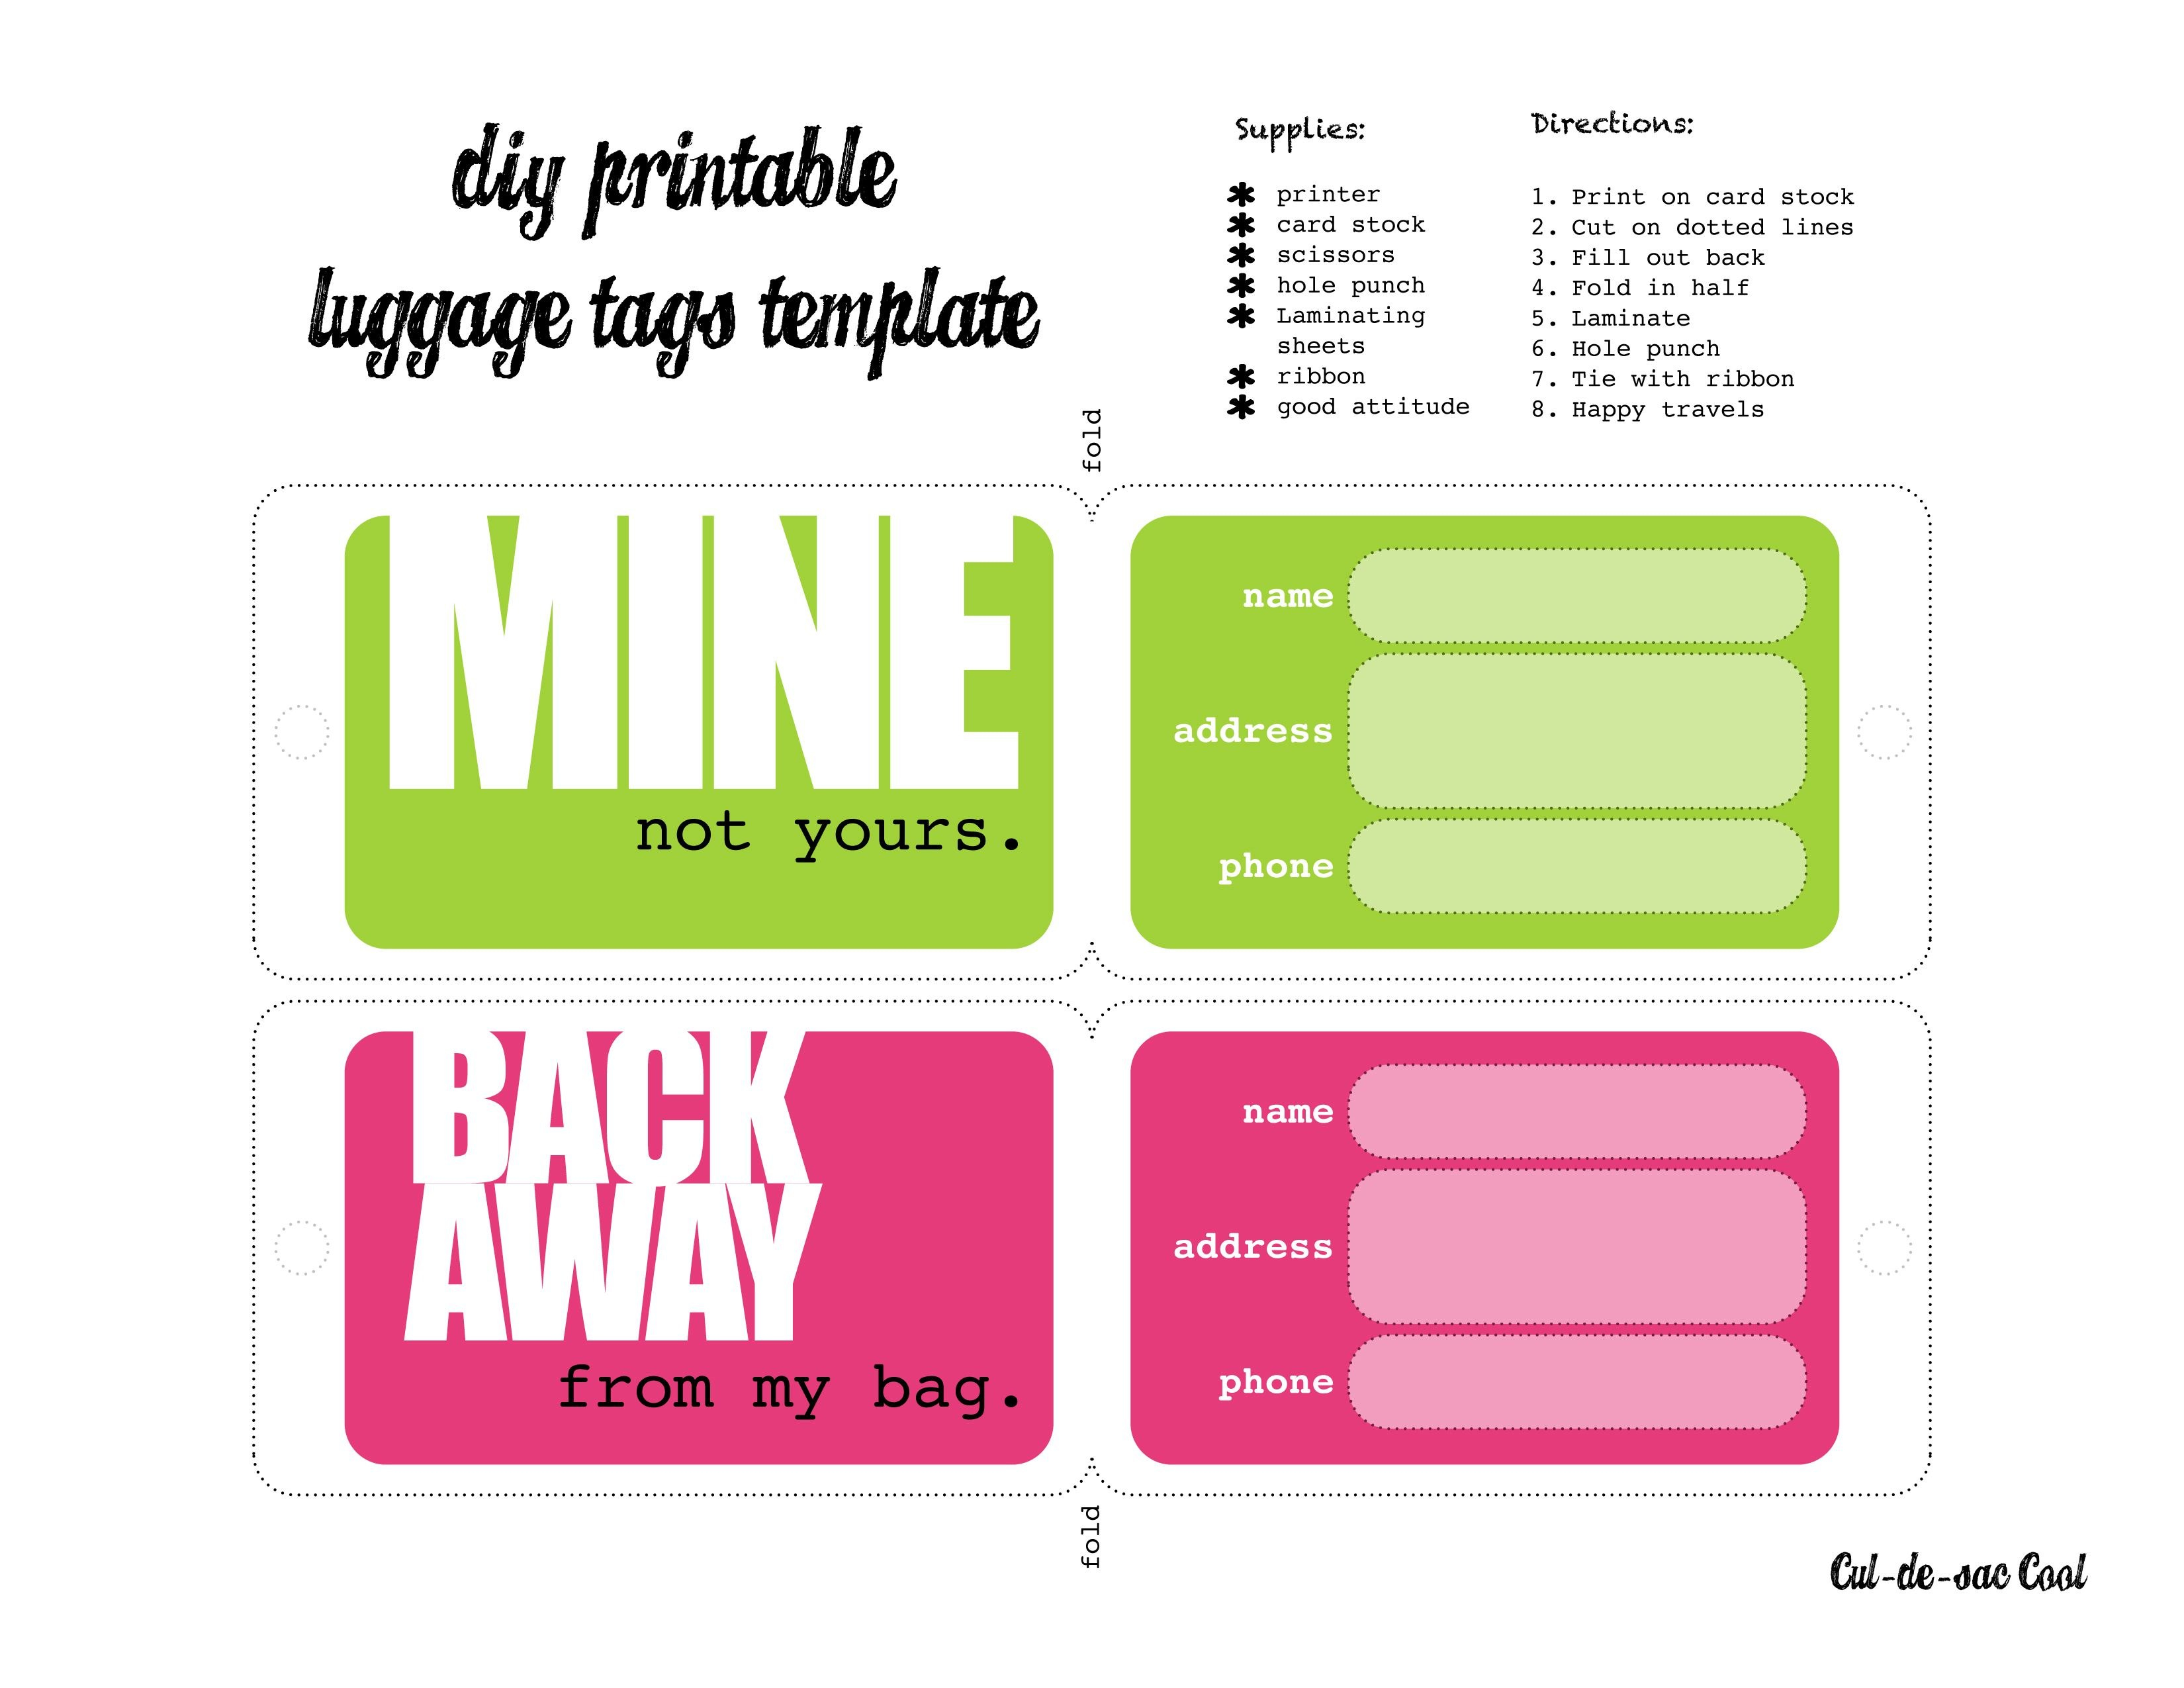 Luggage Tags Template I Was Able To Print Them And Cut Them Down A pertaining to Luggage Label Template Free Download